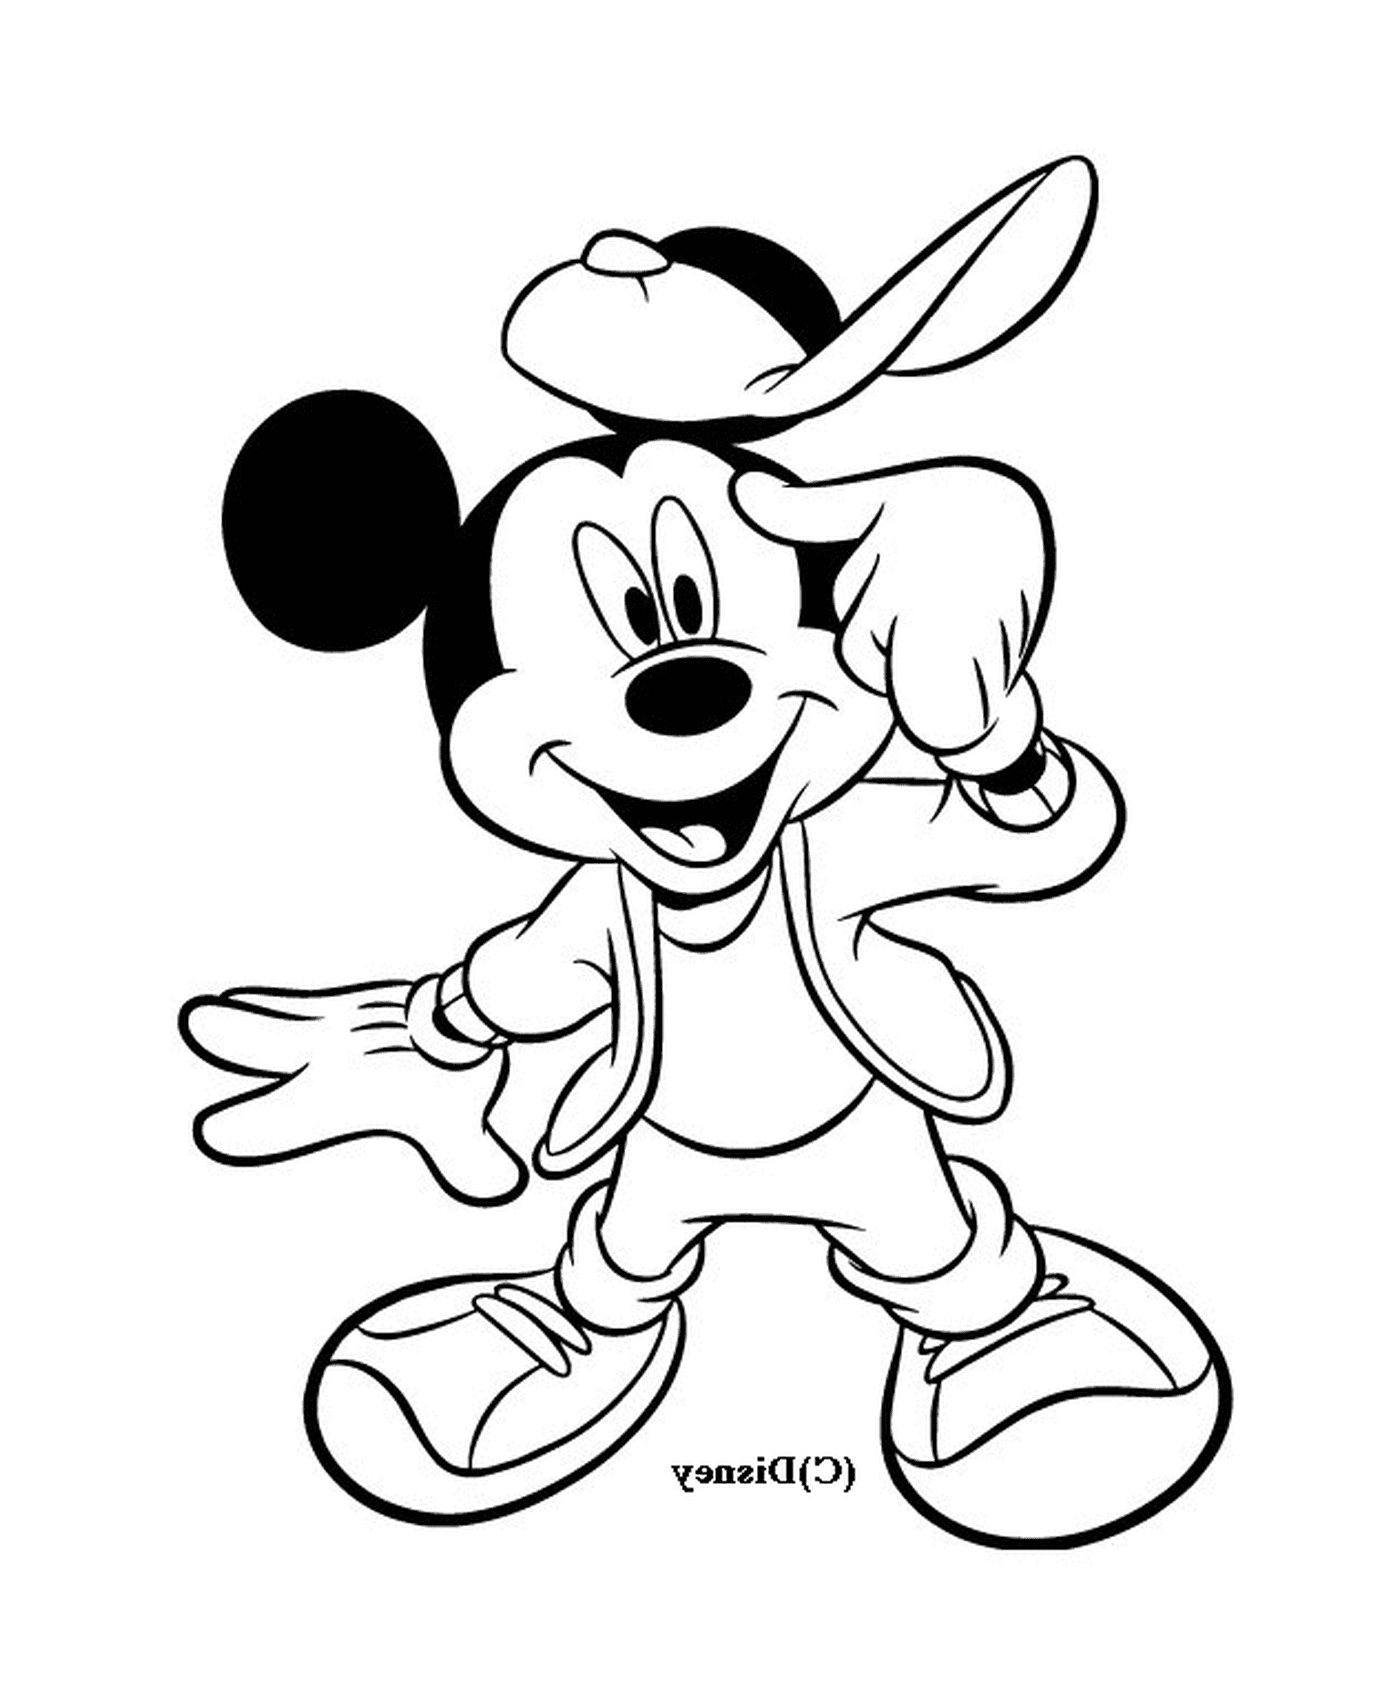  Mickey is cool: wearing a baseball cap and a jacket 